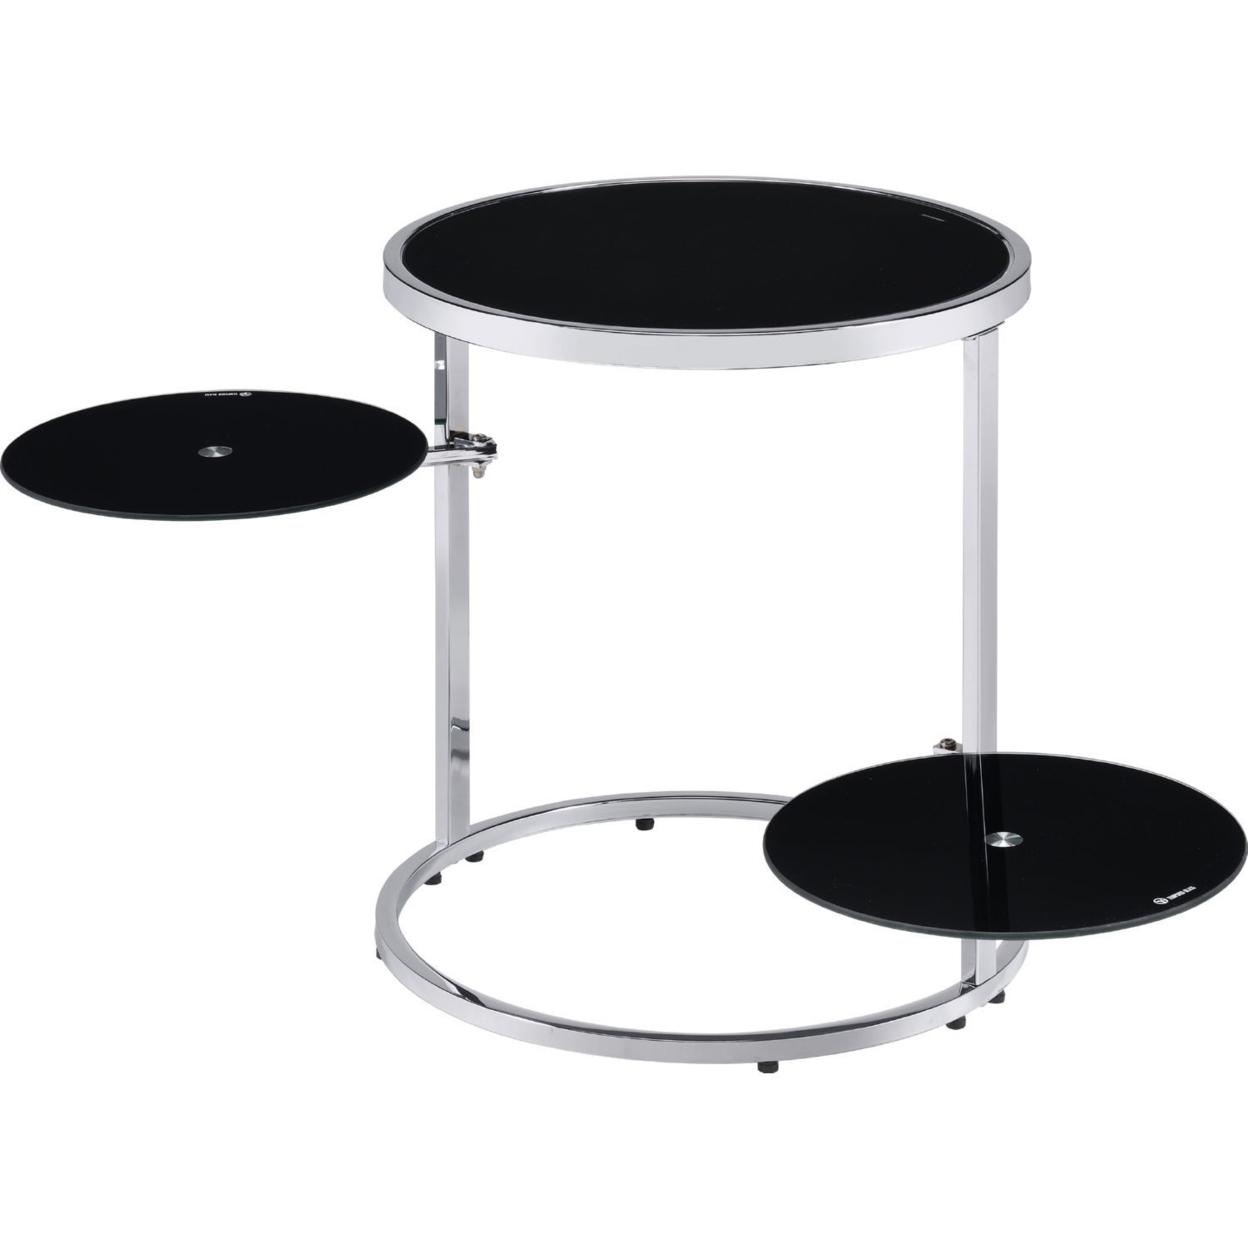 20 Inch Accent Table With 2 Tier Swivel Glass Shelves, Black And Chrome-Saltoro Sherpi